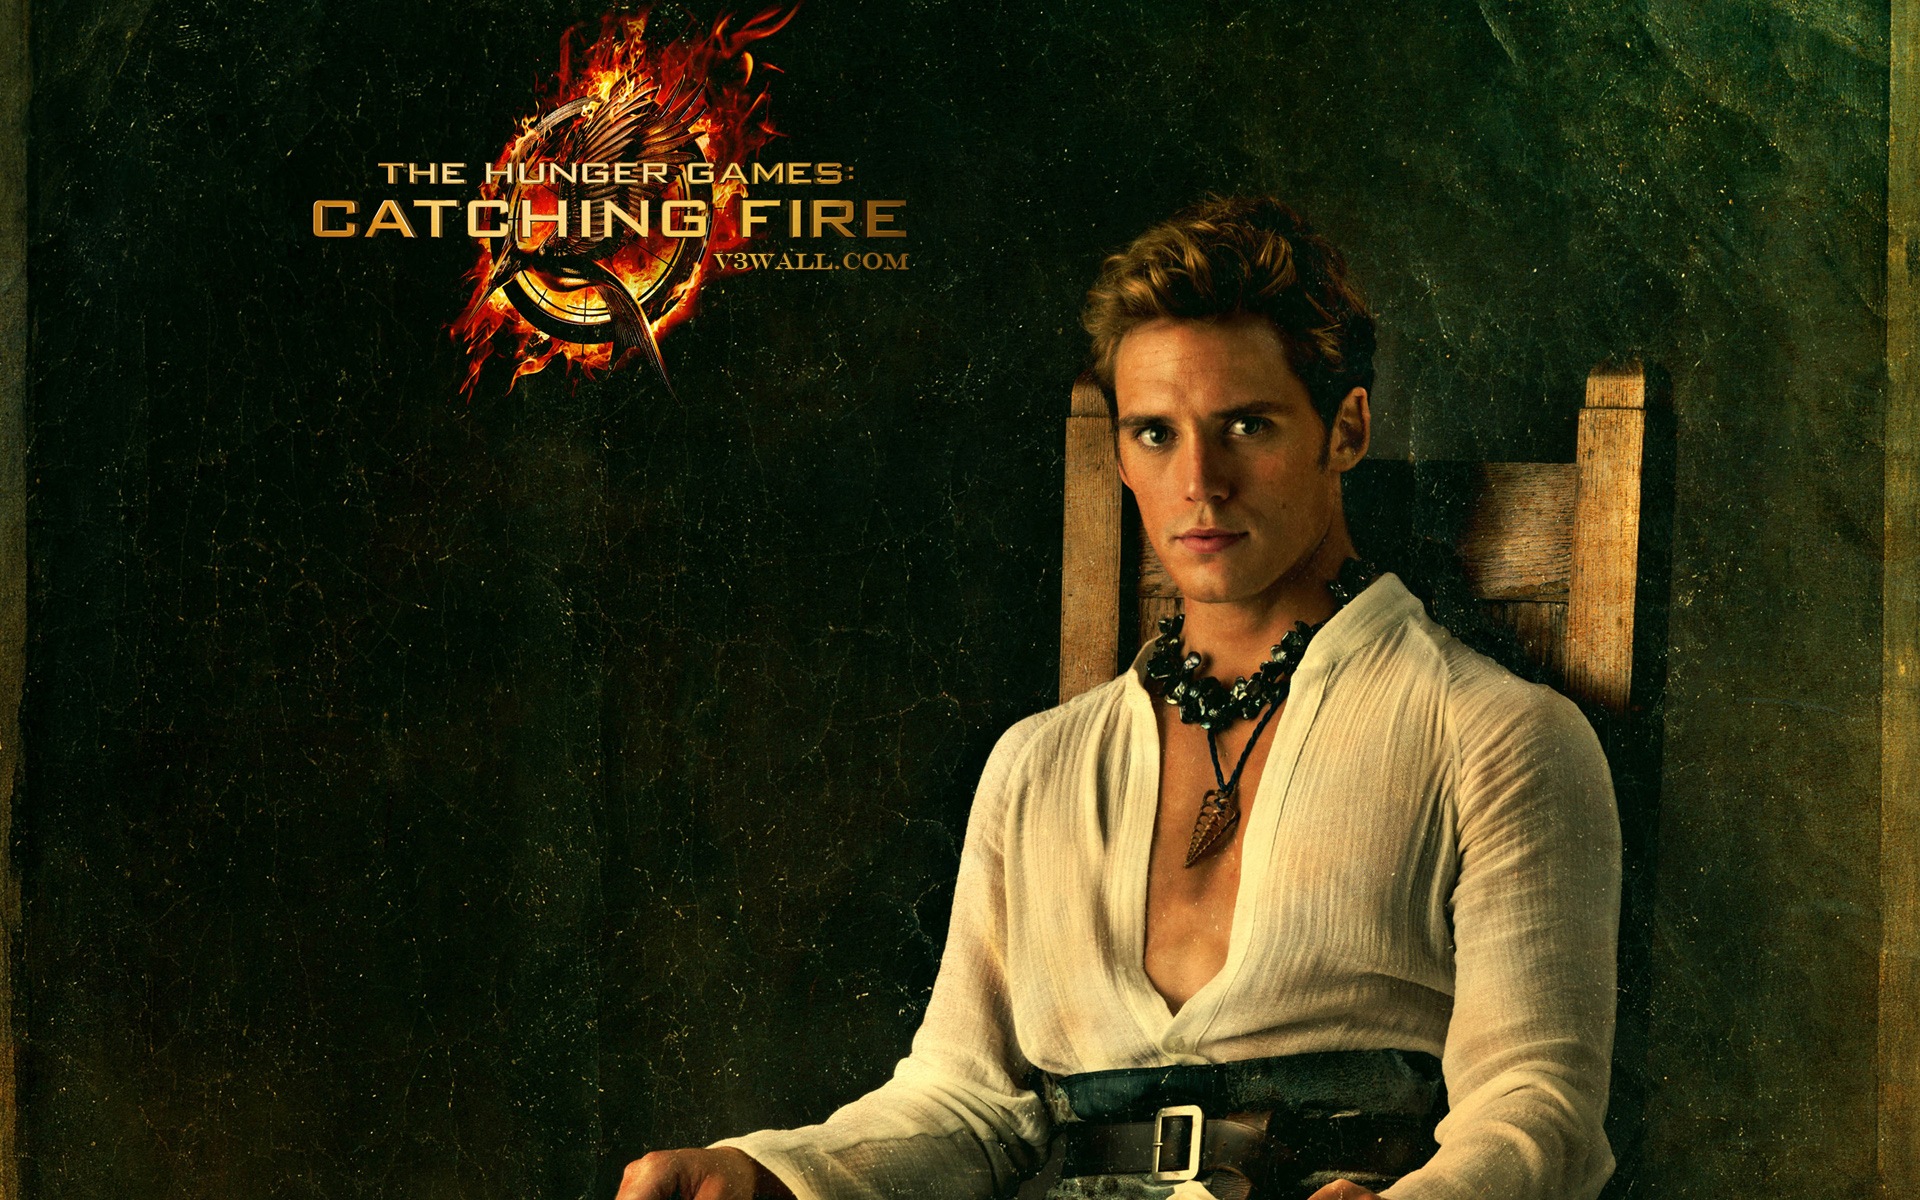 The Hunger Games: Catching Fire wallpapers HD #10 - 1920x1200